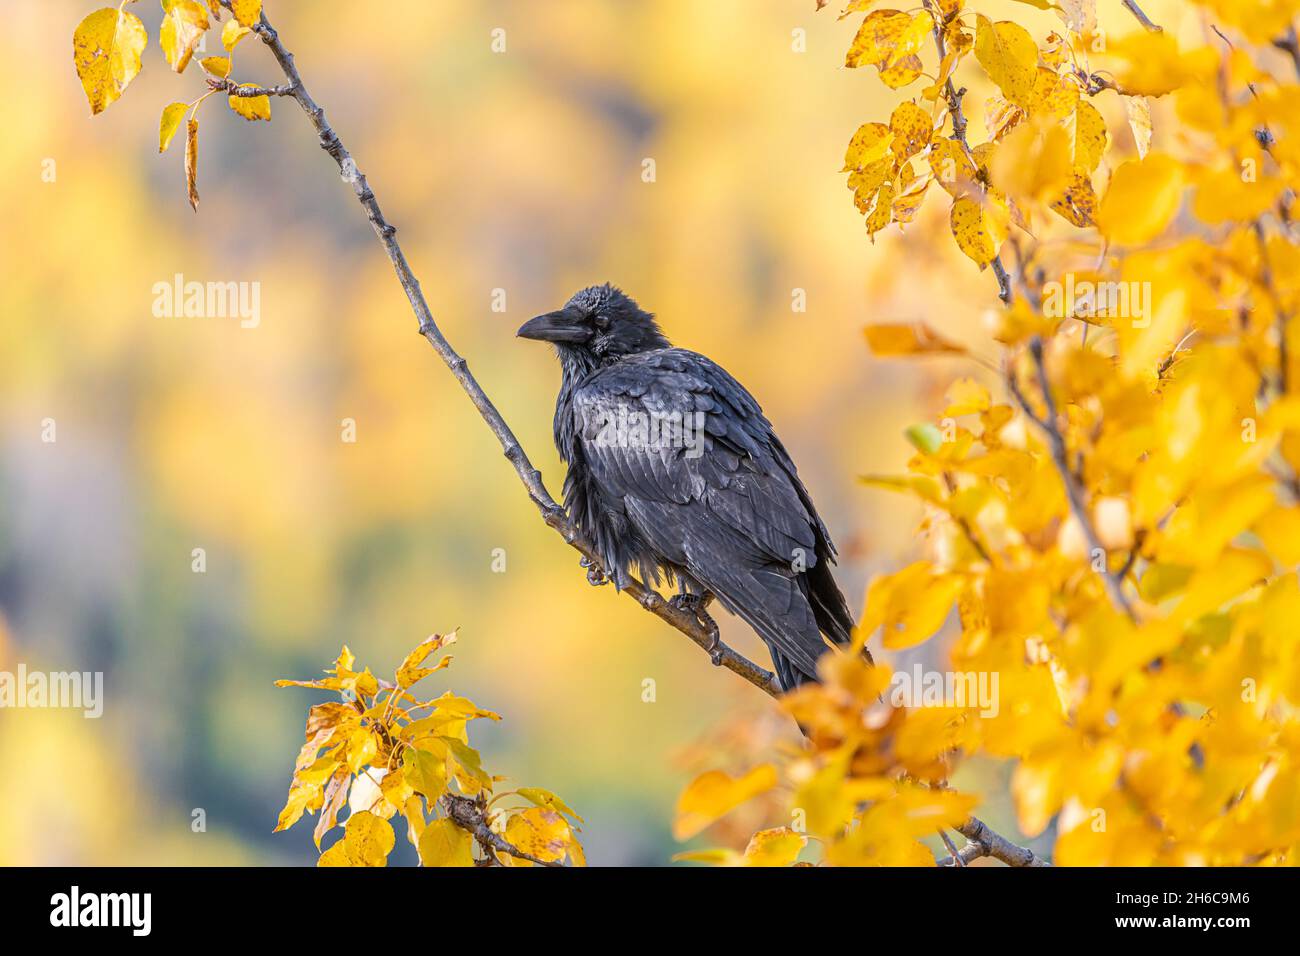 Yellow fall, autumn leaves in September with a small black raven seen in view. Stock Photo